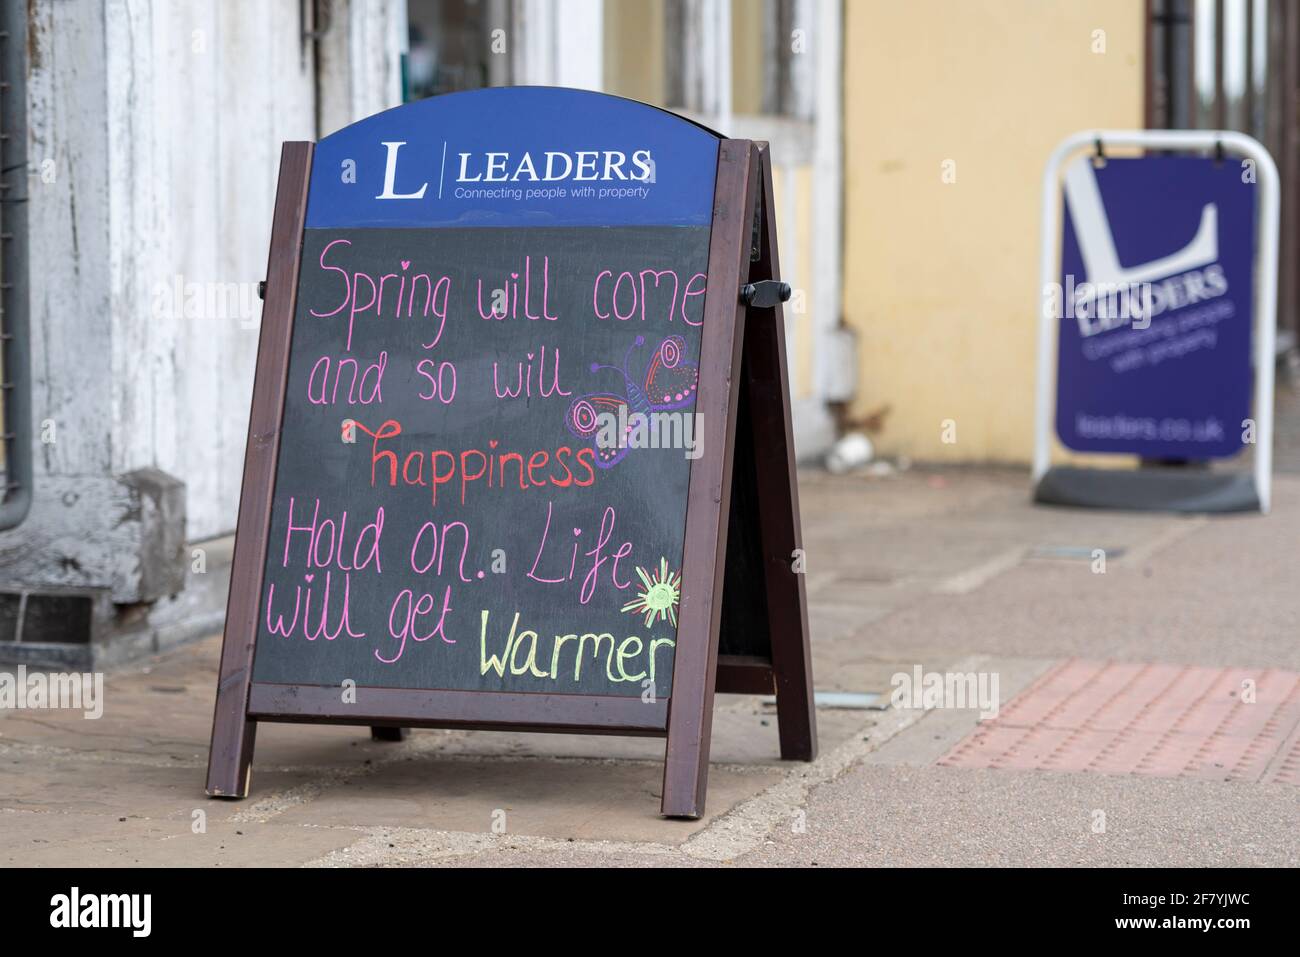 Uplifting message chalked on a blackboard outside Leaders estate agents, as UK looks to roadmap out of lockdown from COVID 19 pandemic Stock Photo